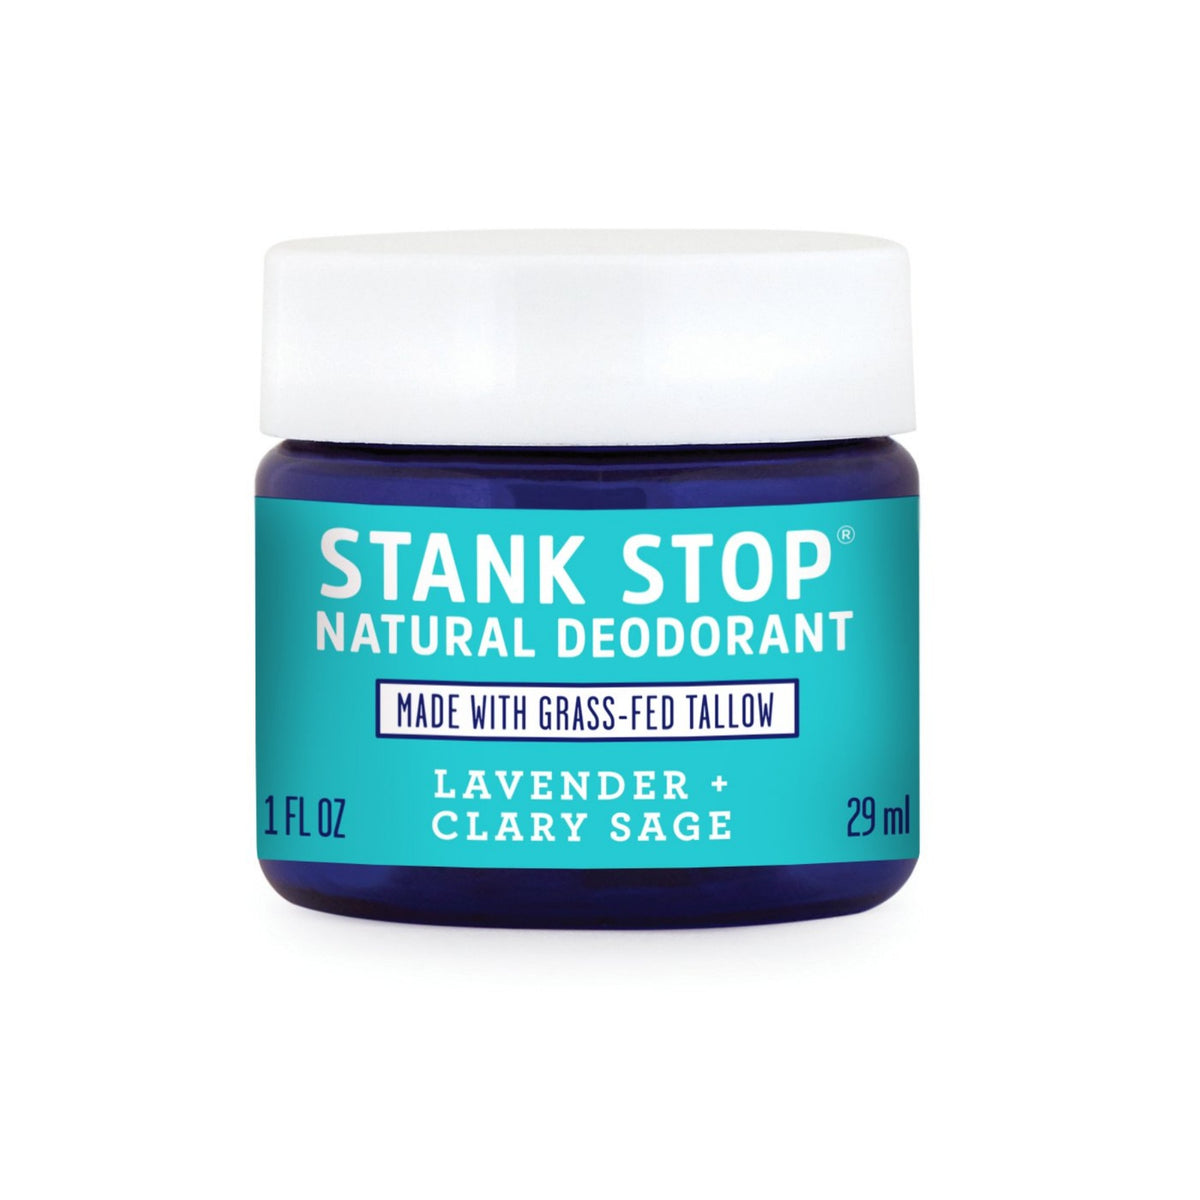 Stank Stop Deodorant, Lavender + Sage by FATCO Skincare Products